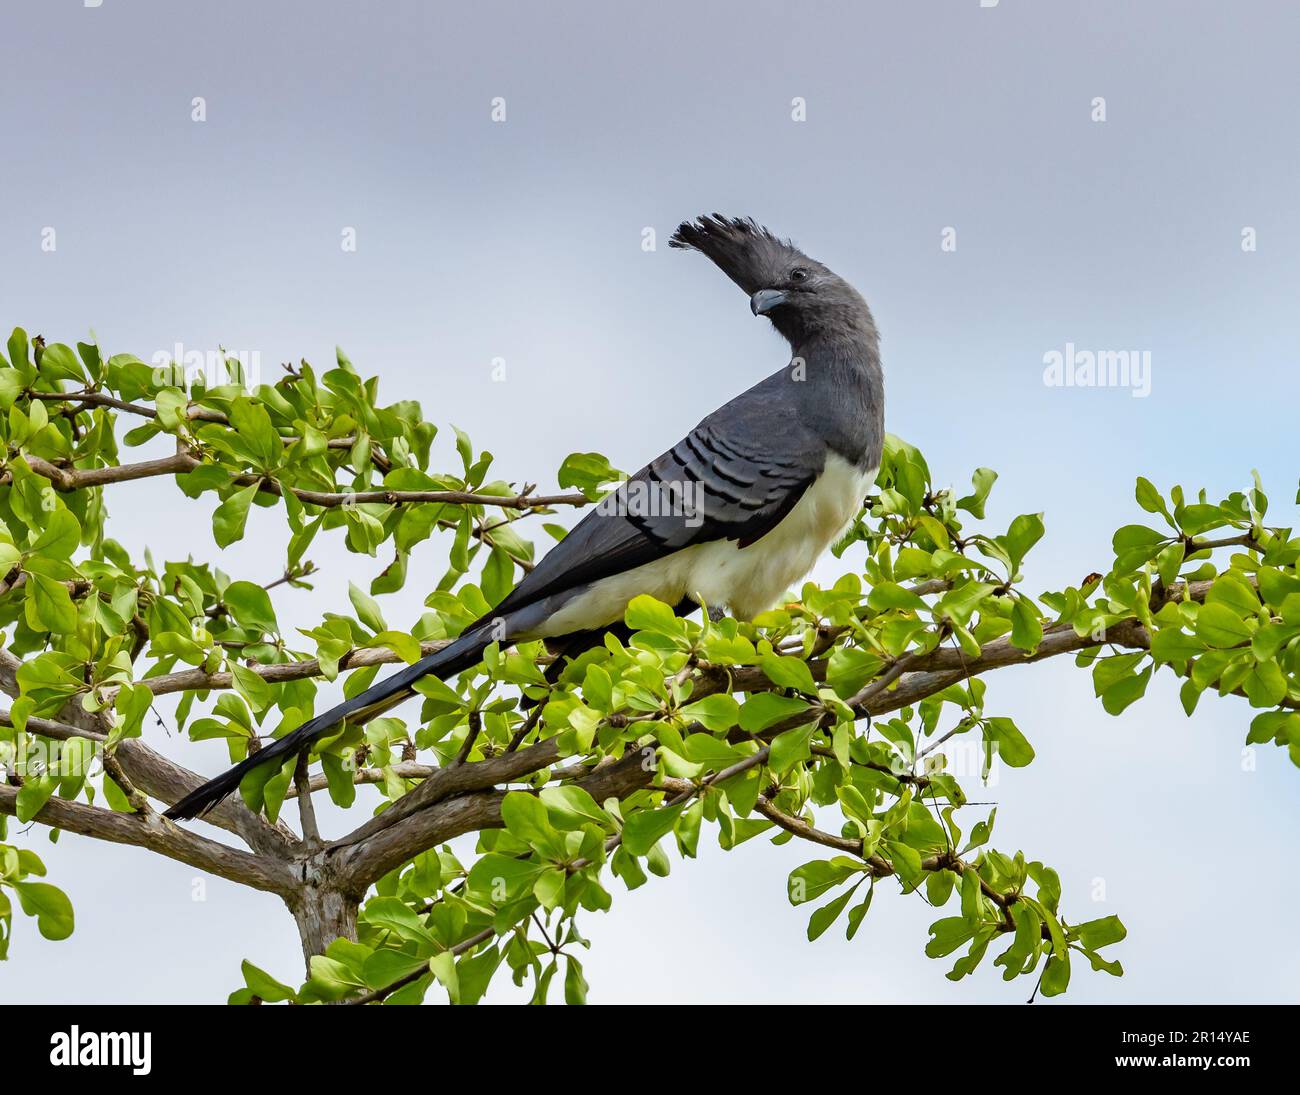 A White-bellied Go-away-bird (Corythaixoides leucogaster) perched on a branch. Kenya, Africa. Stock Photo